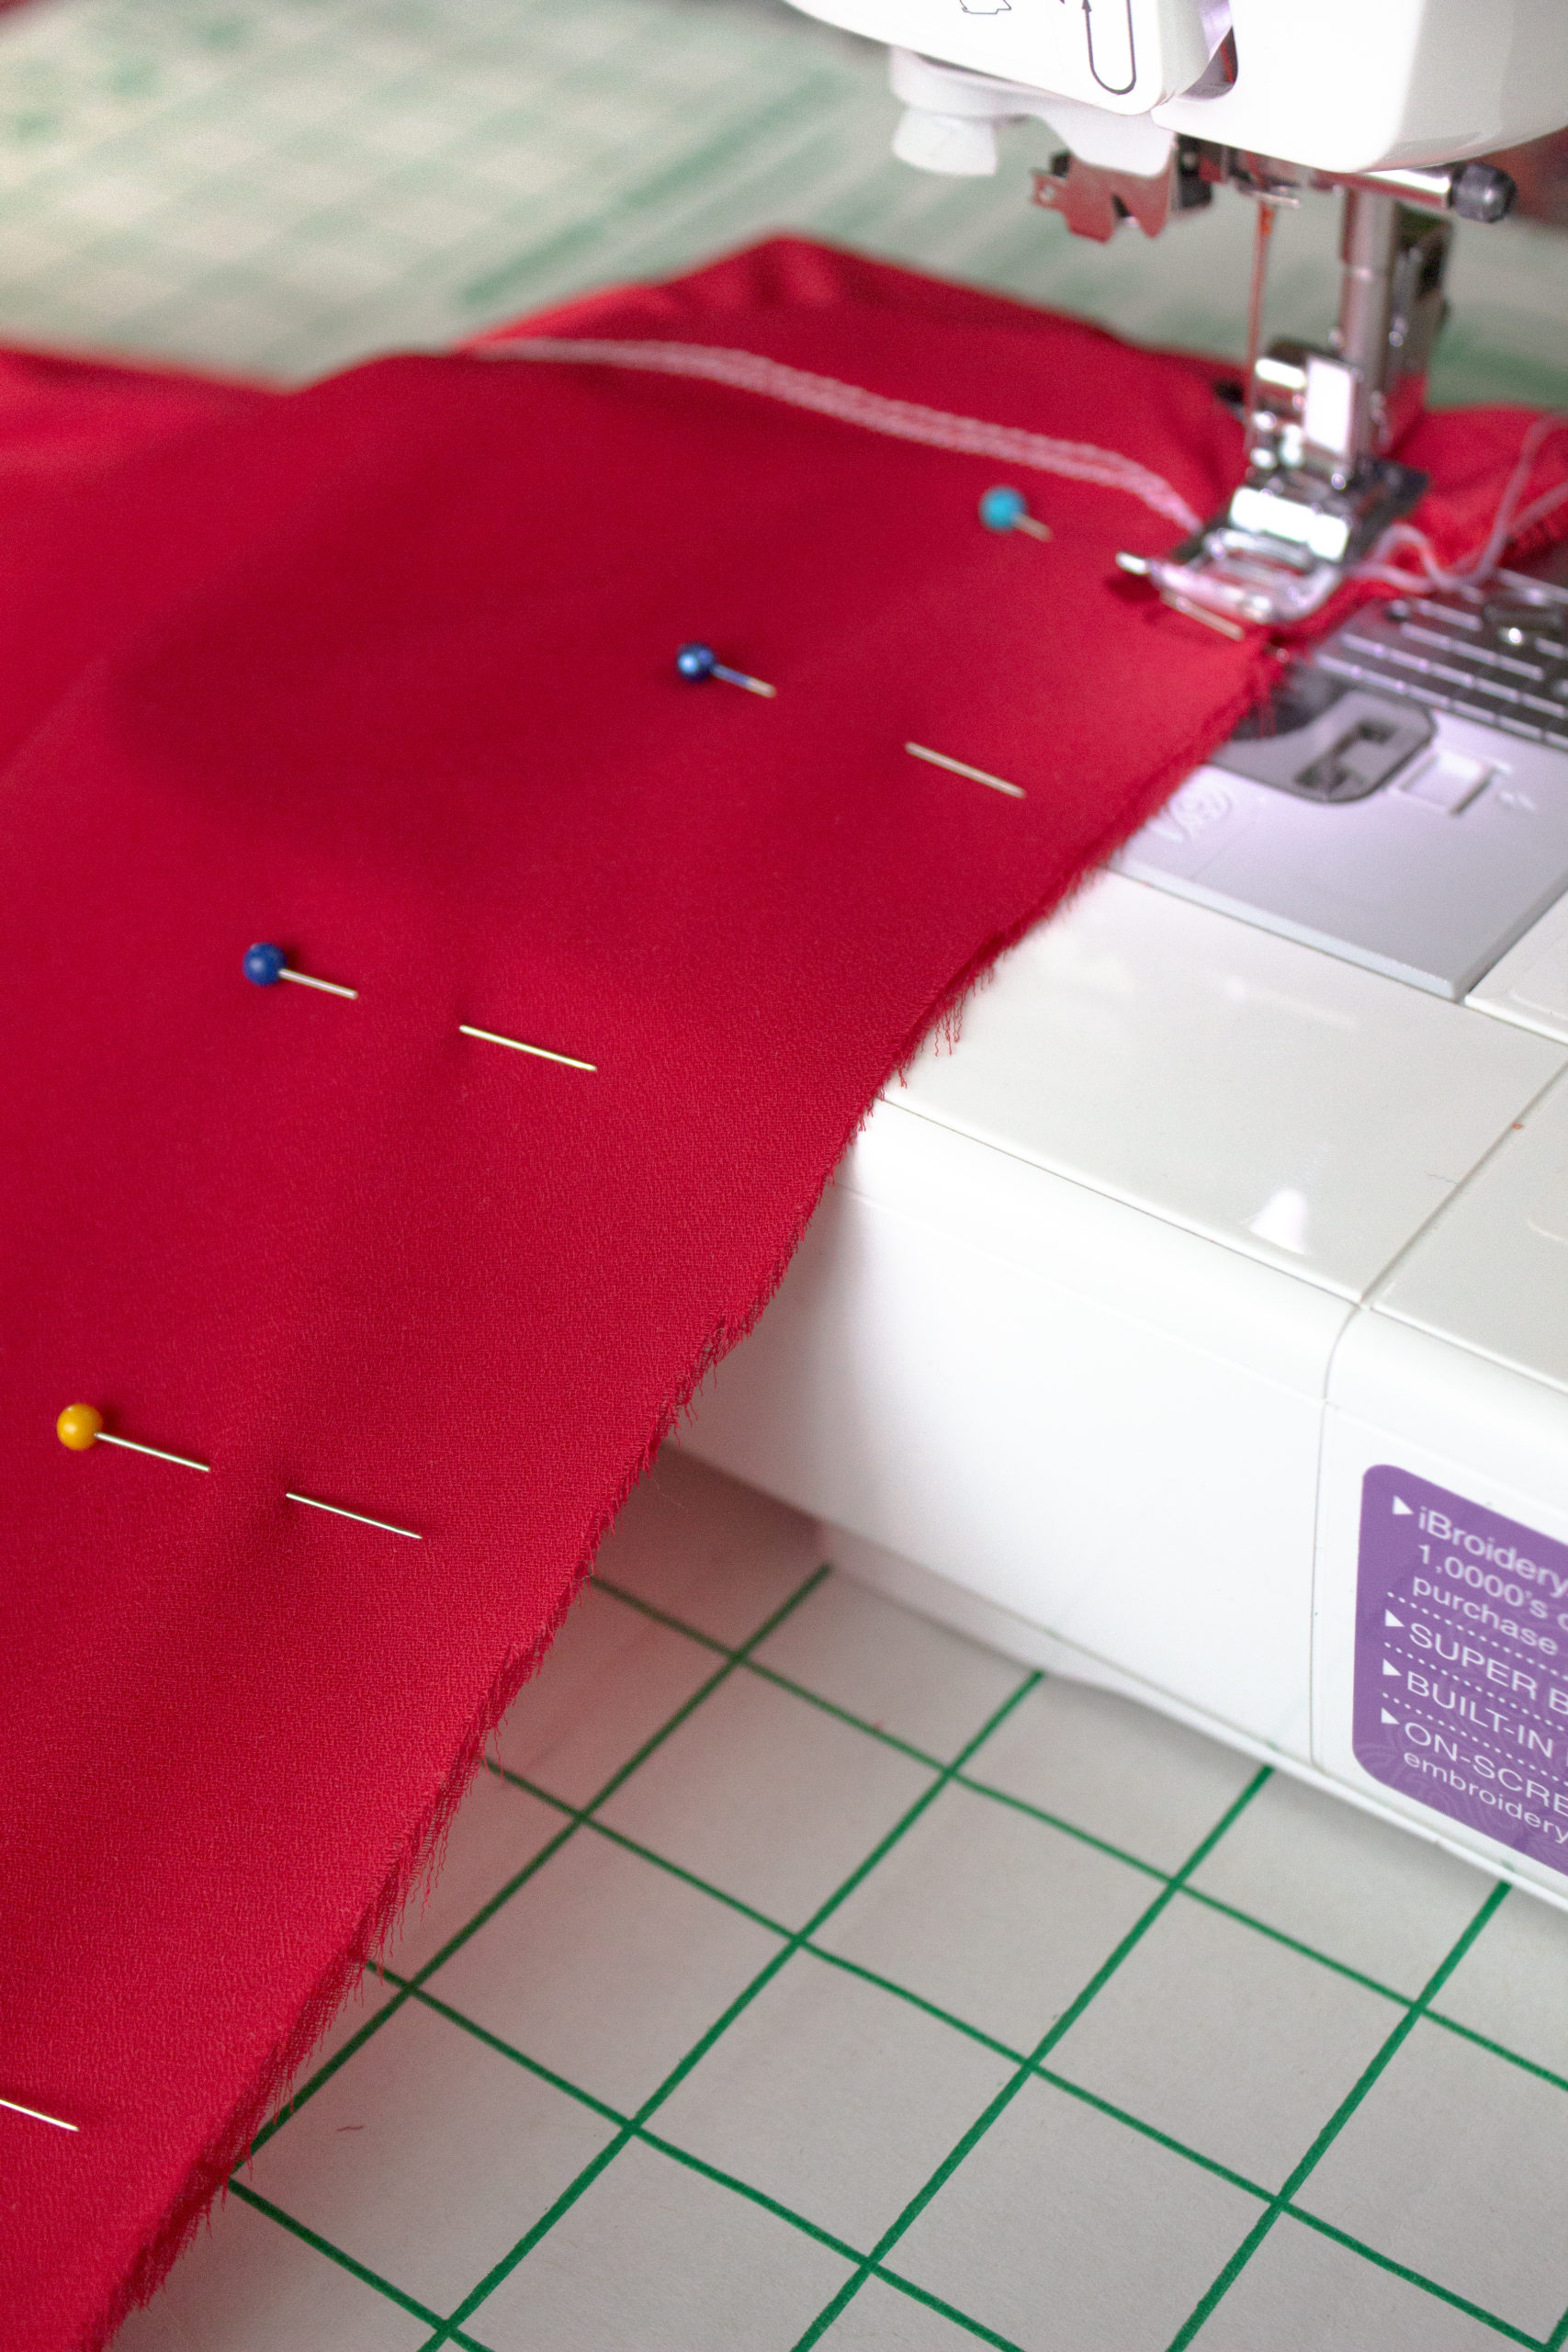 The 5 Basic Seams You Need to Know Before Sewing